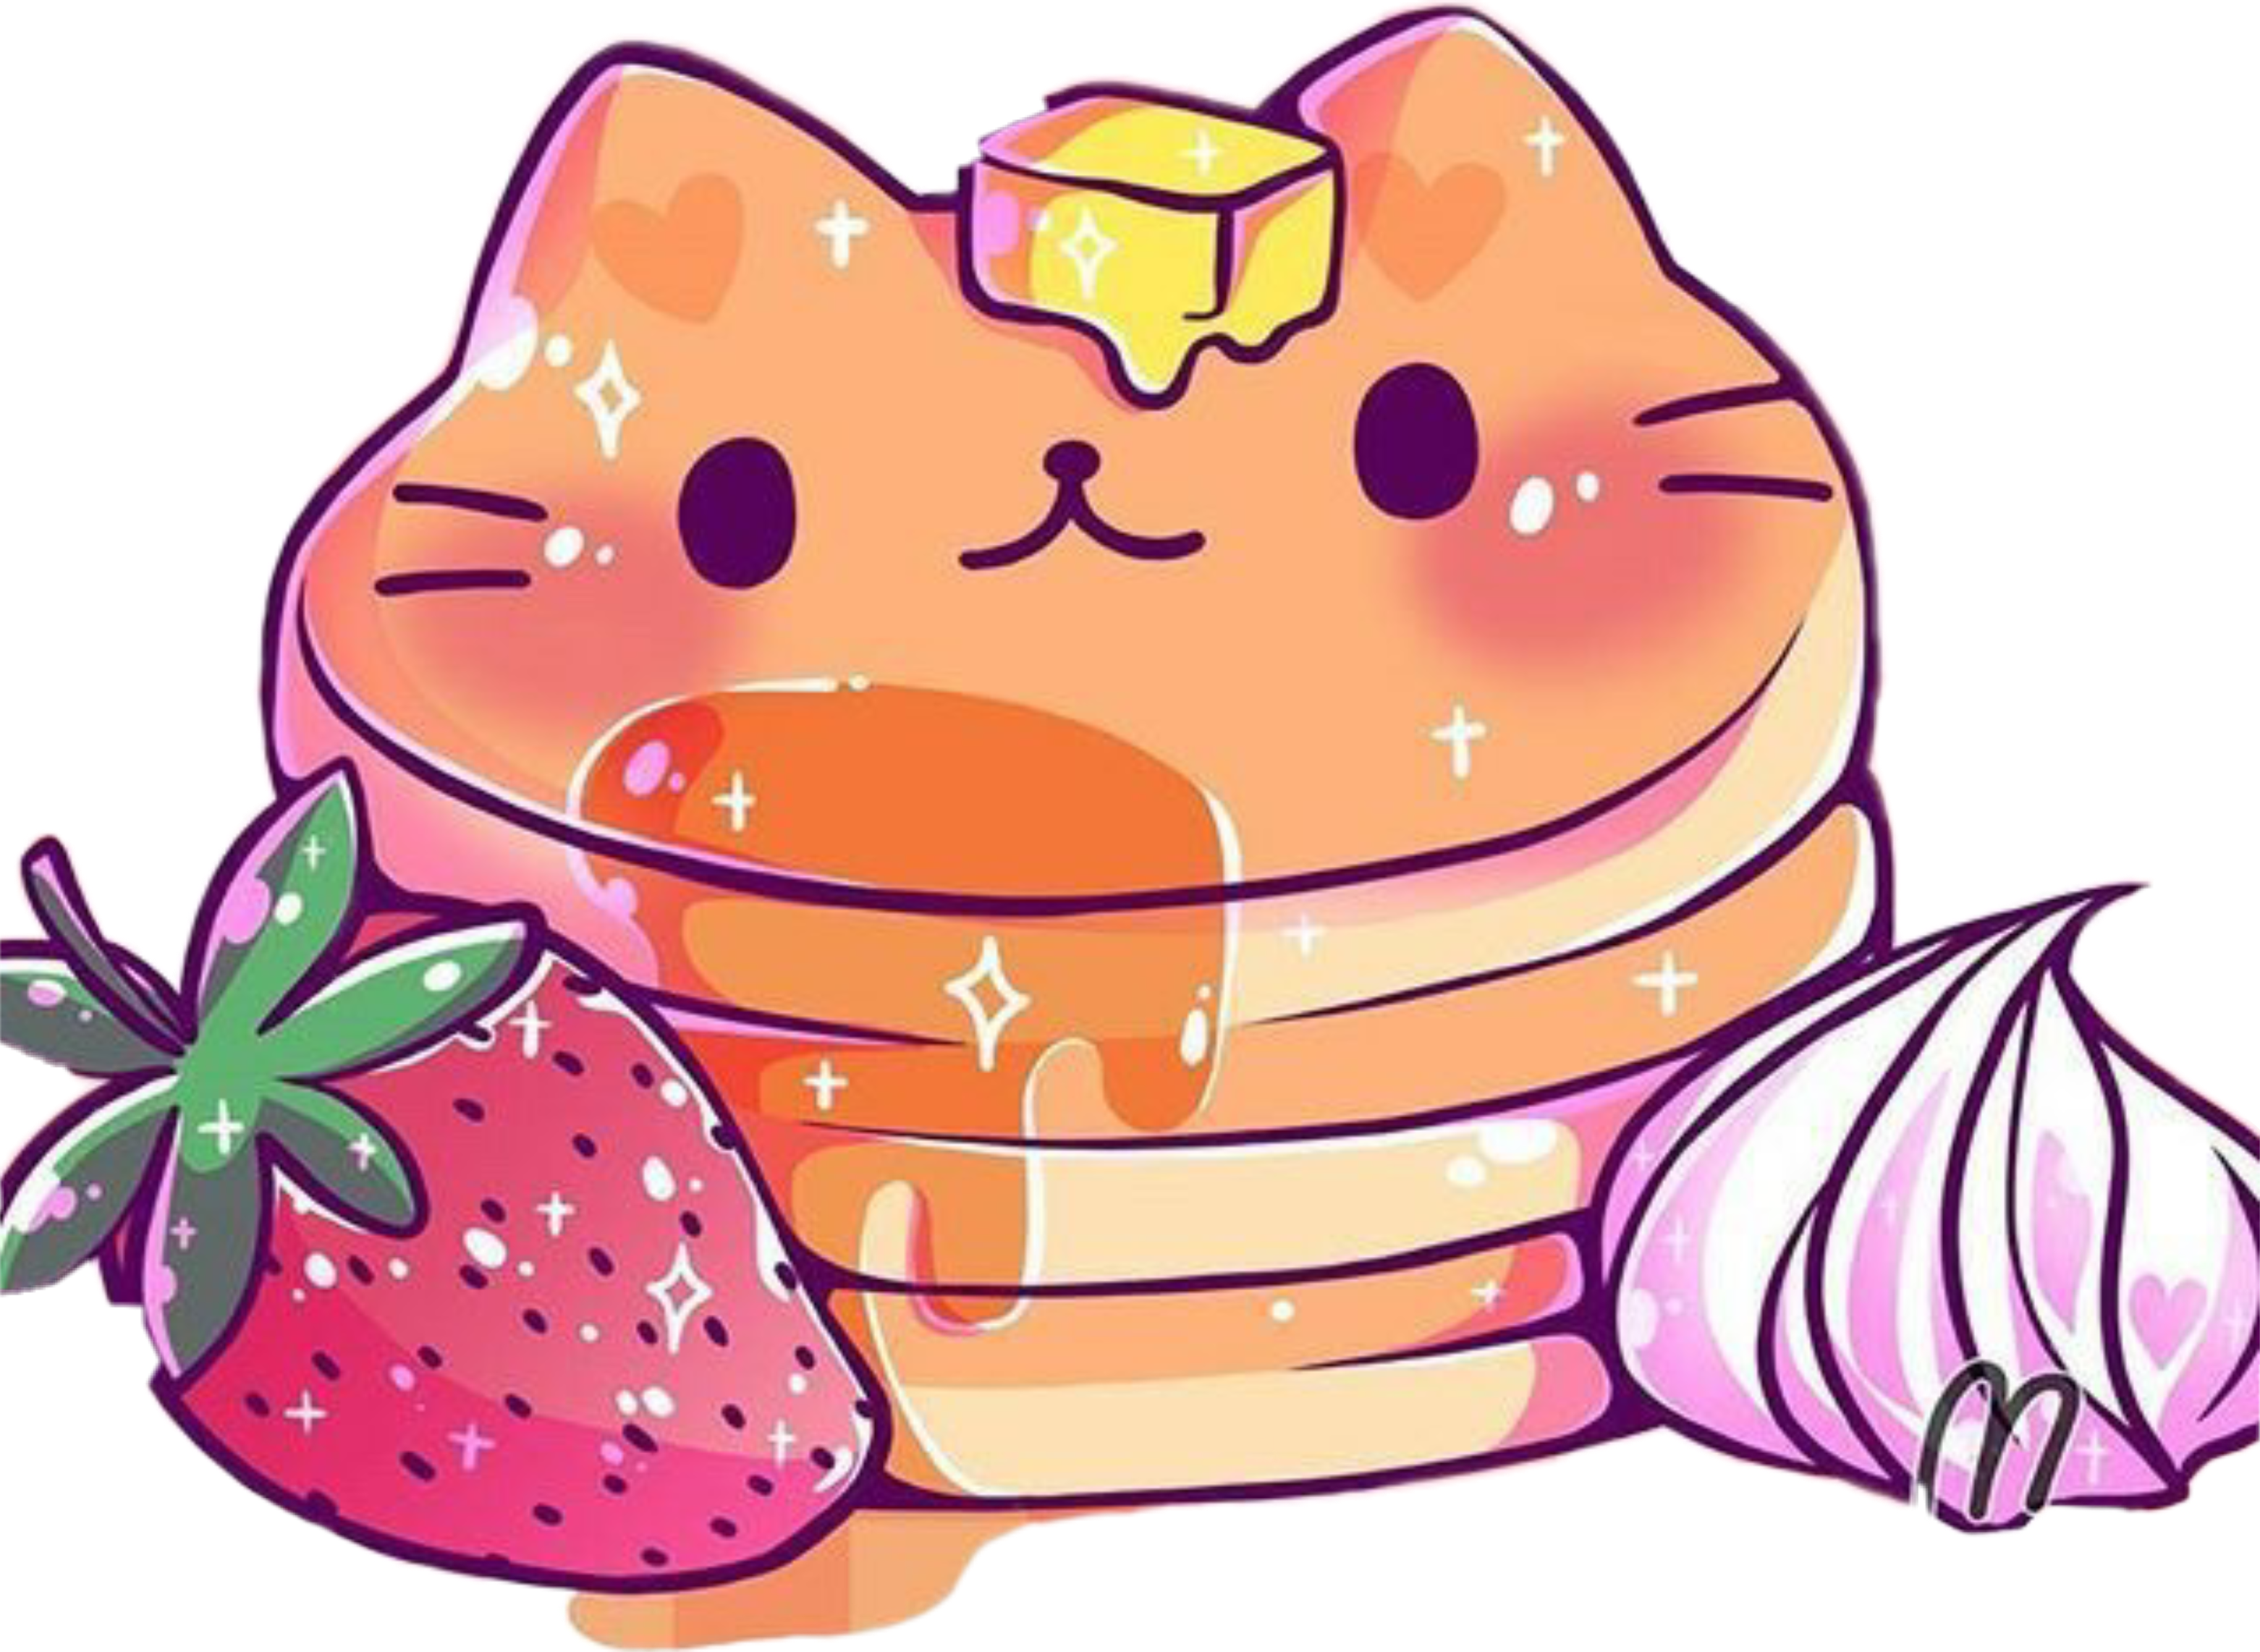 A Cartoon Of A Cat Pancakes And A Strawberry